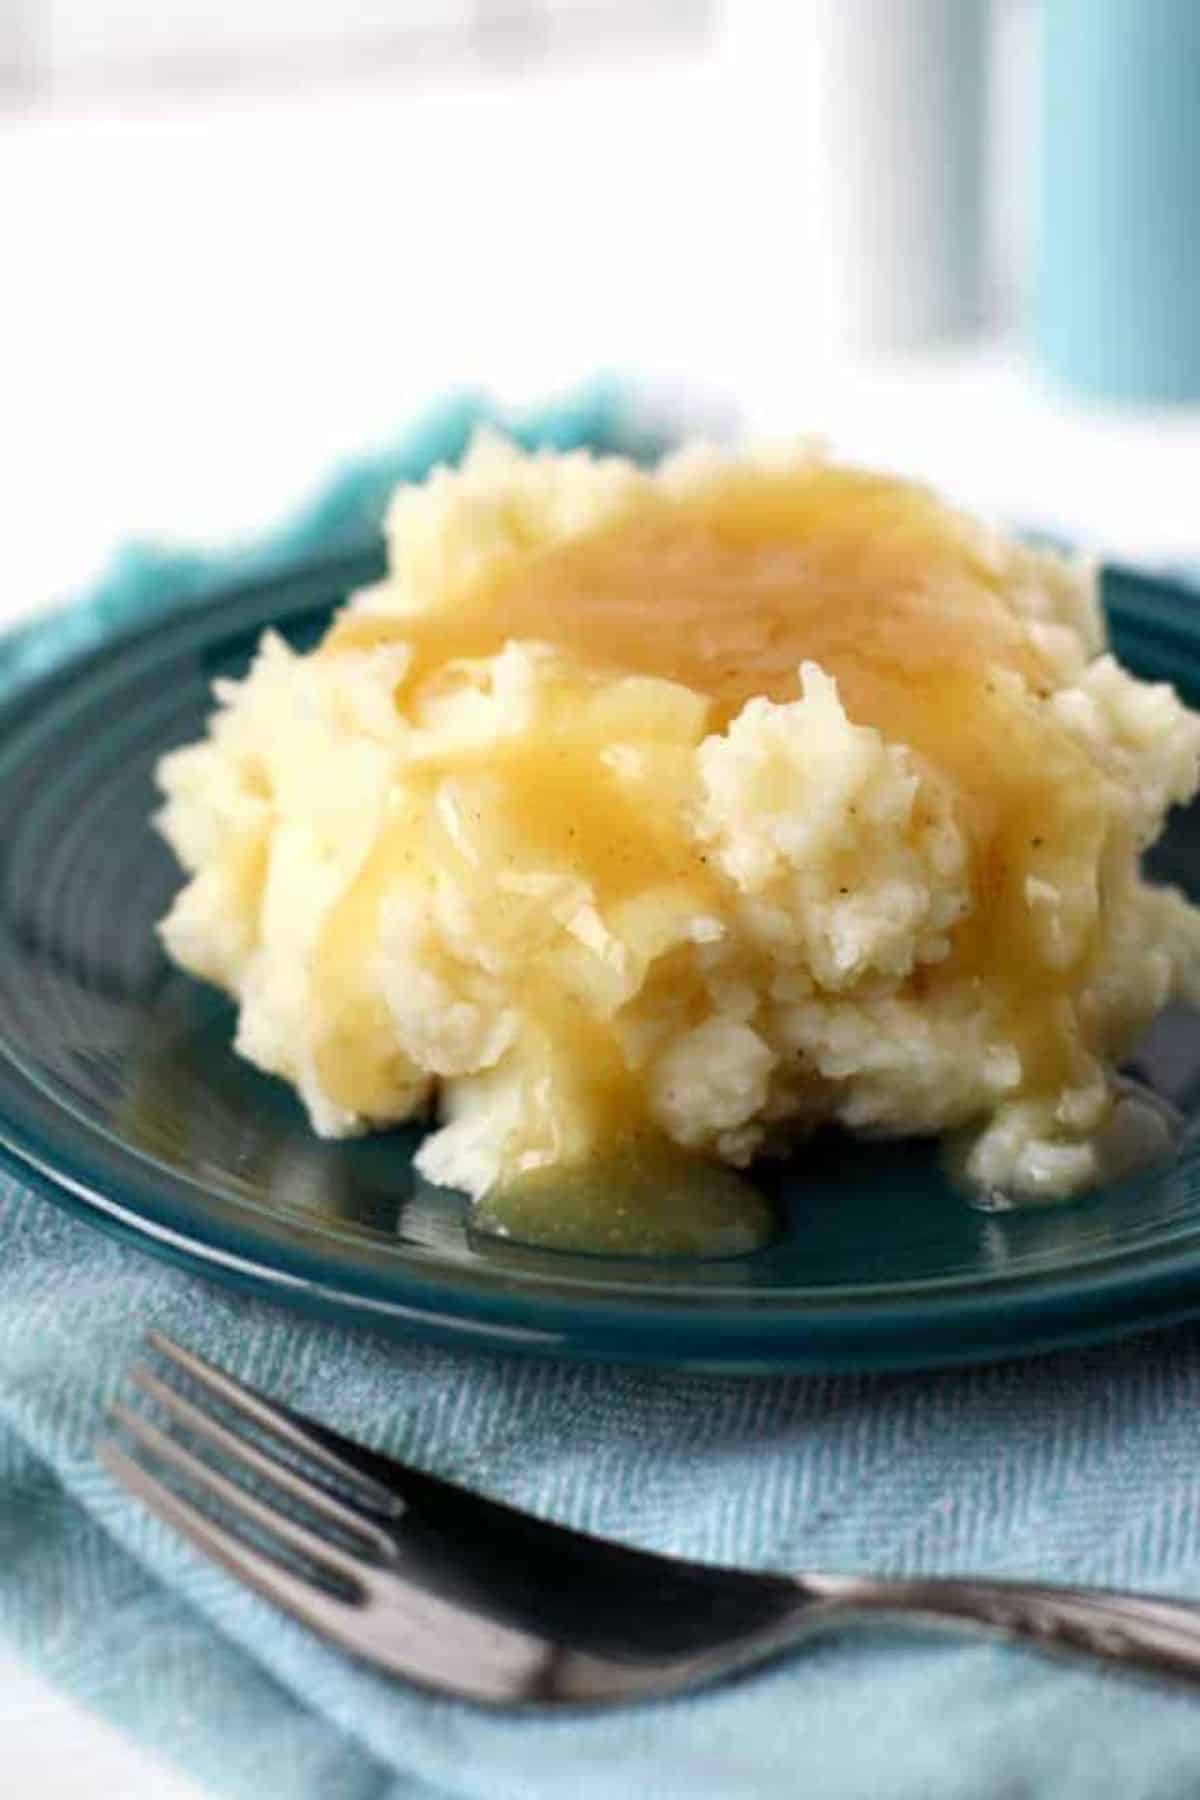 Tasty Easy Gluten-Free Gravy on mashed potatoes on a blue plate.